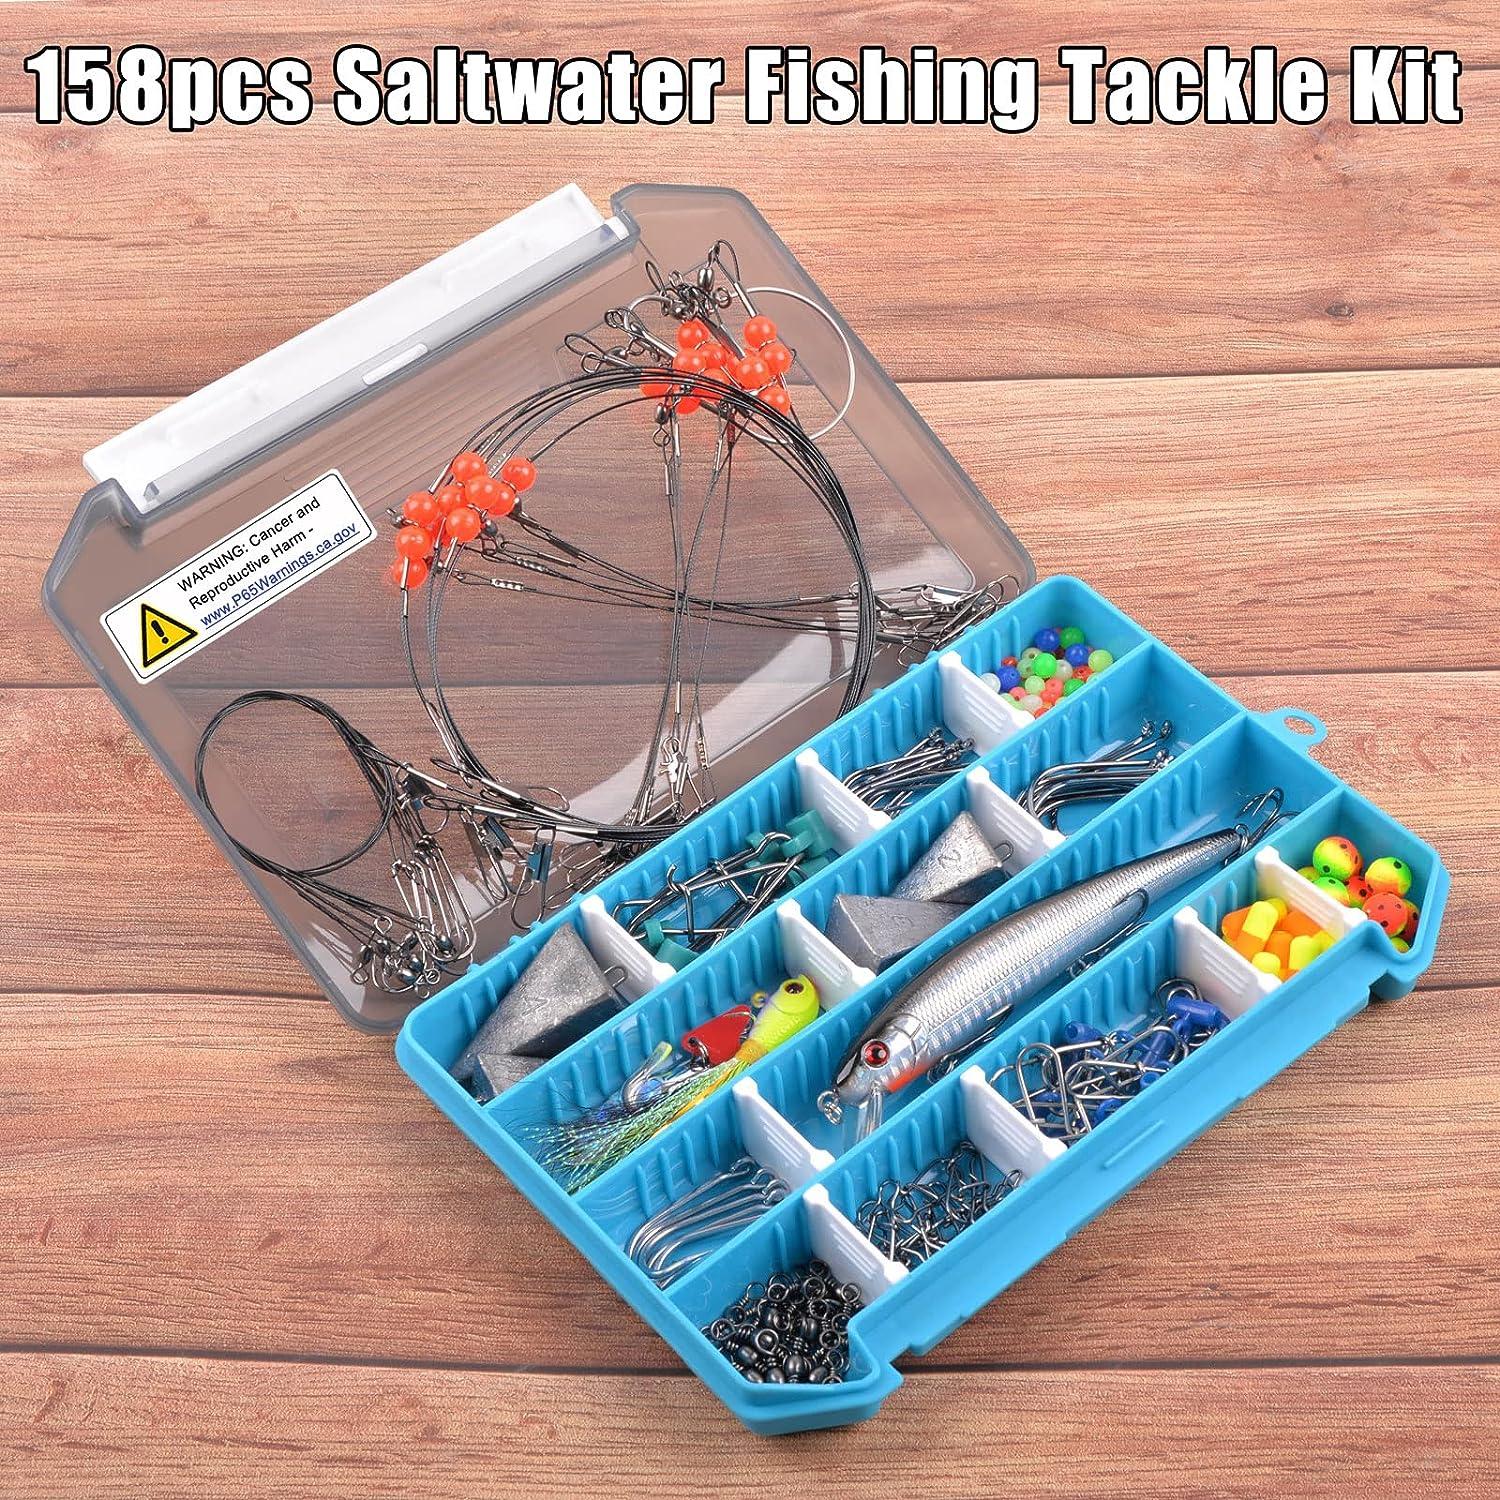 Buy Tailored Tackle Saltwater Surf Fishing Kit Tackle Box with